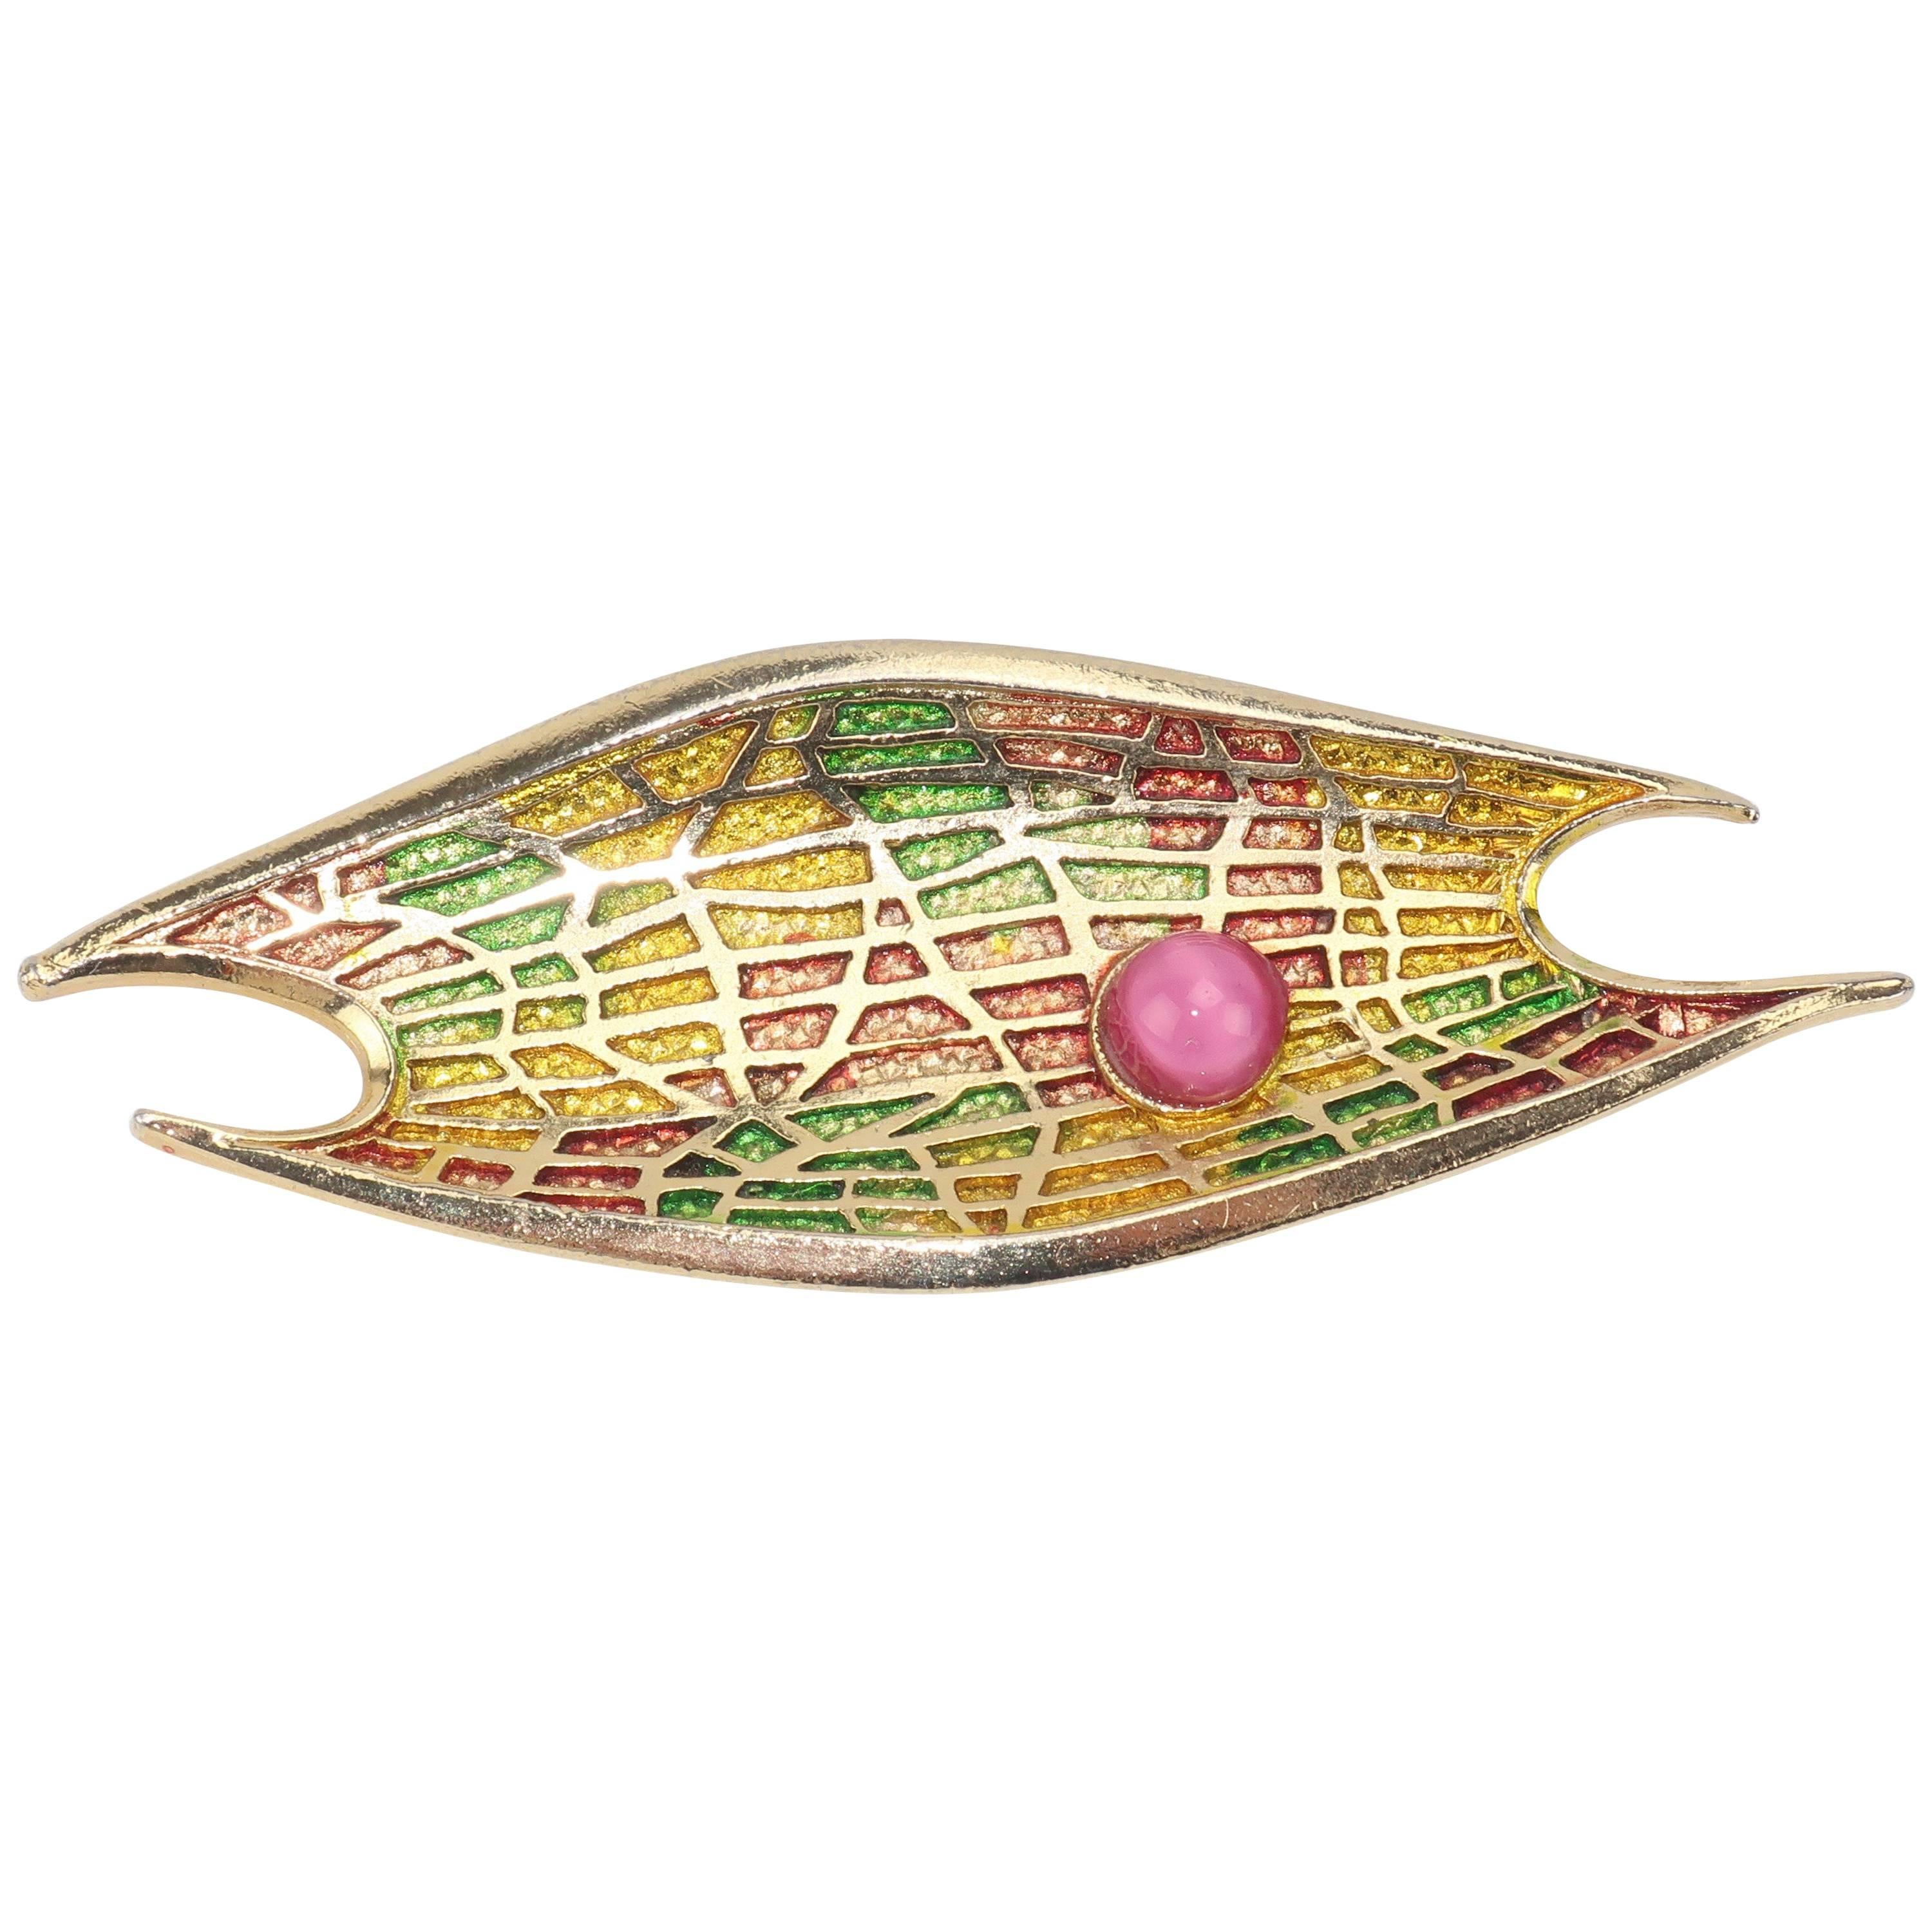 Circa 1970 Abstract Modernist Gold Tone Brooch With Pink Cabochon